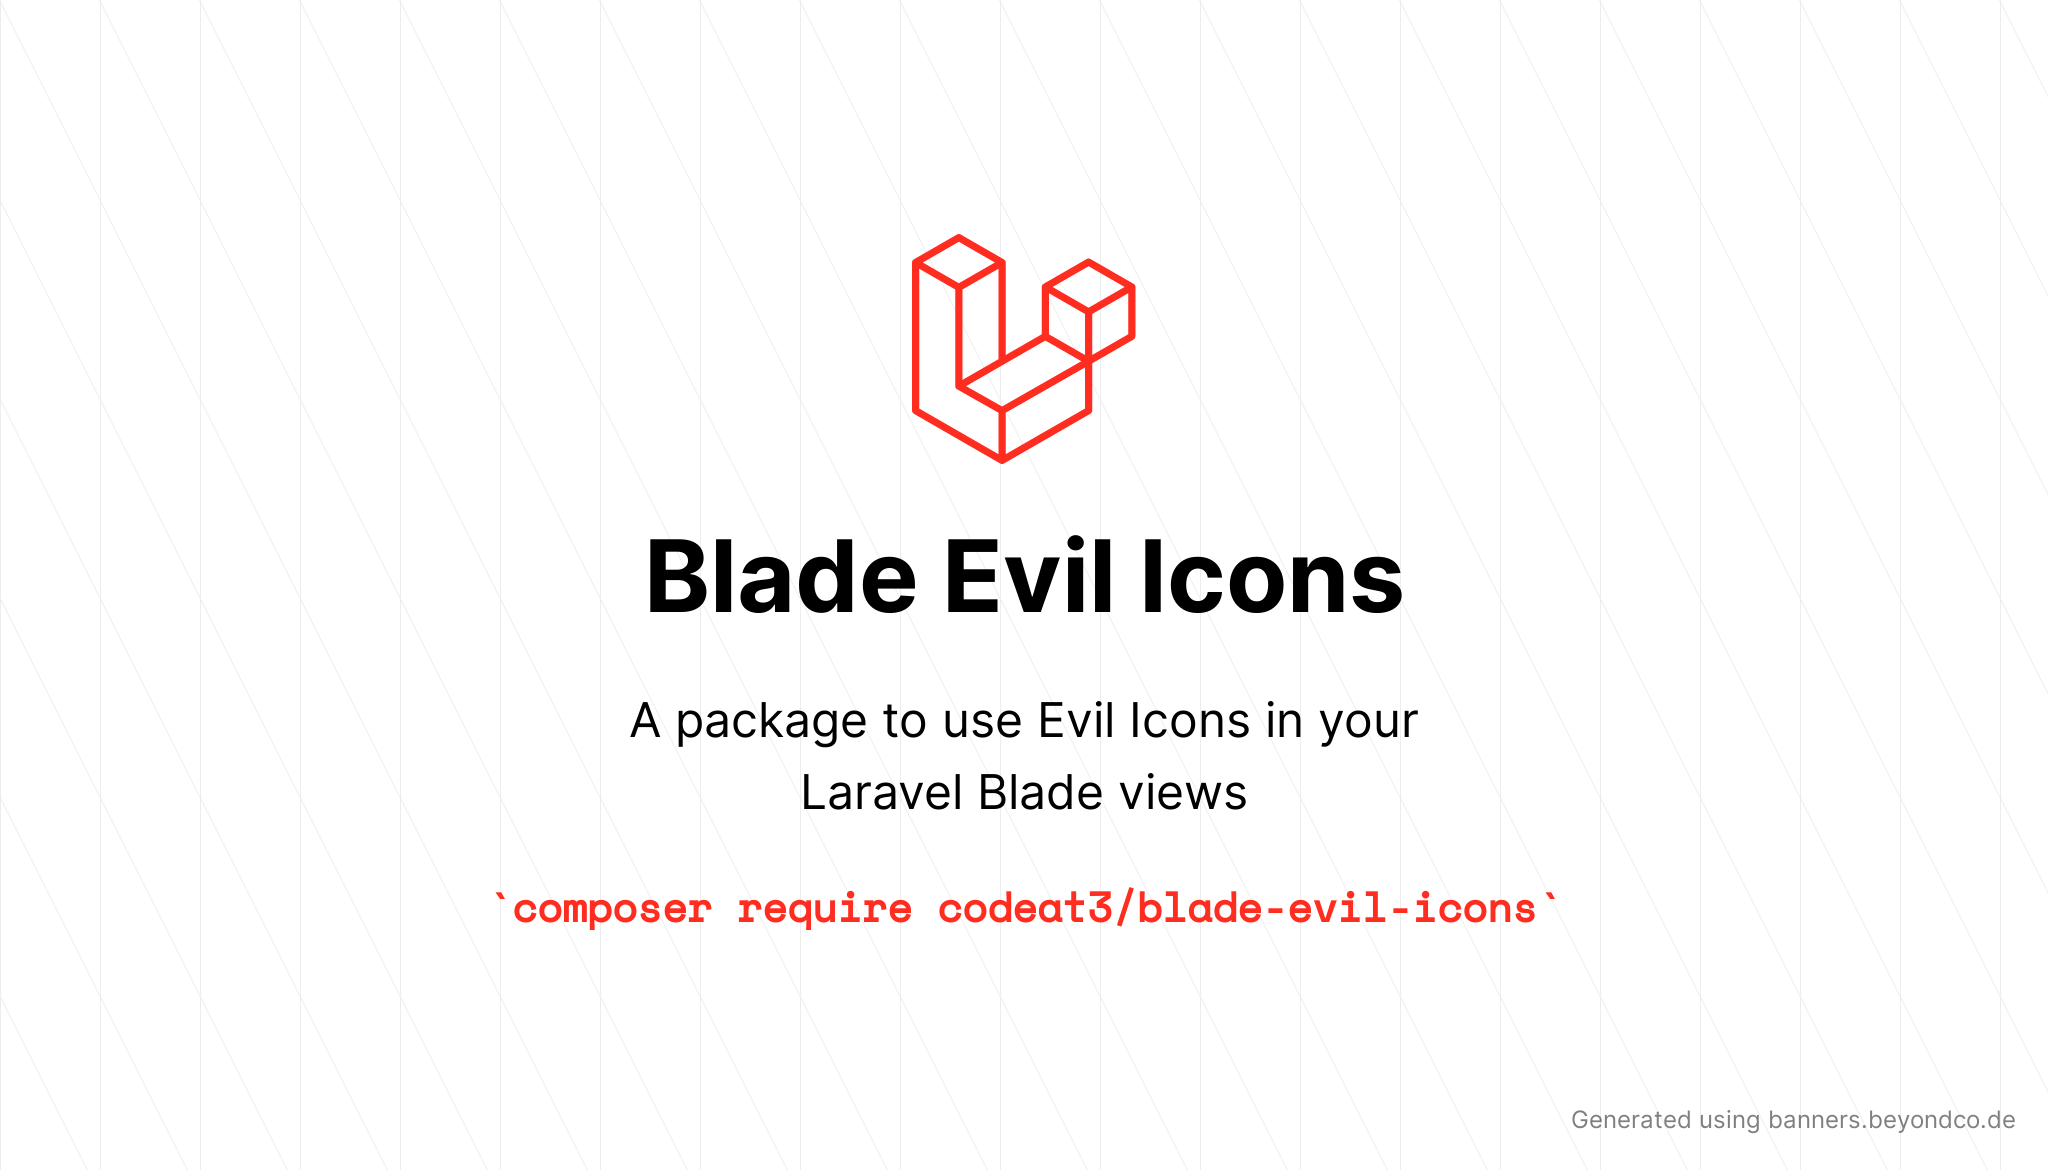 socialcard-blade-evil-icons.png